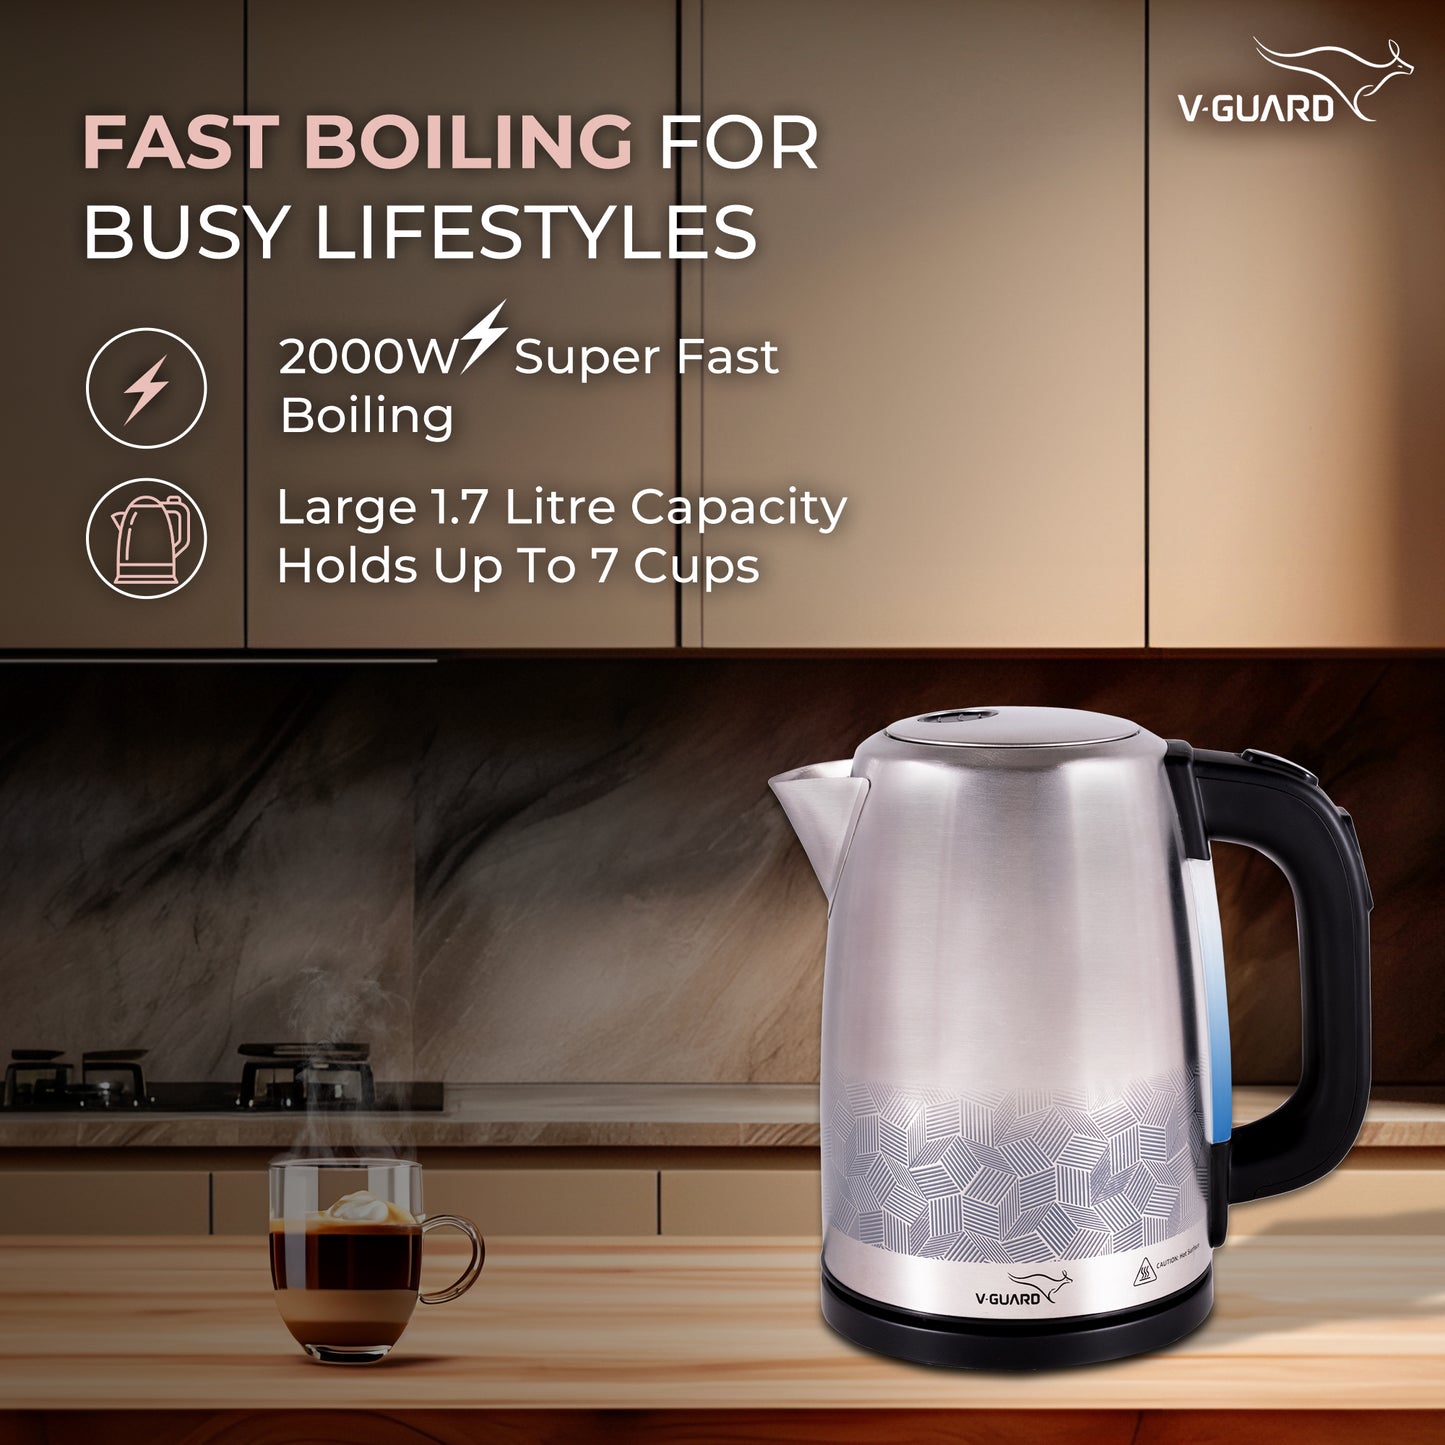 VKS17-DG Digital Electric Kettle 1.7 Litre with Digital Controls & Variable Temperature Settings | Multicolor LED indicators | Hot water kettle for Fast Boiling water